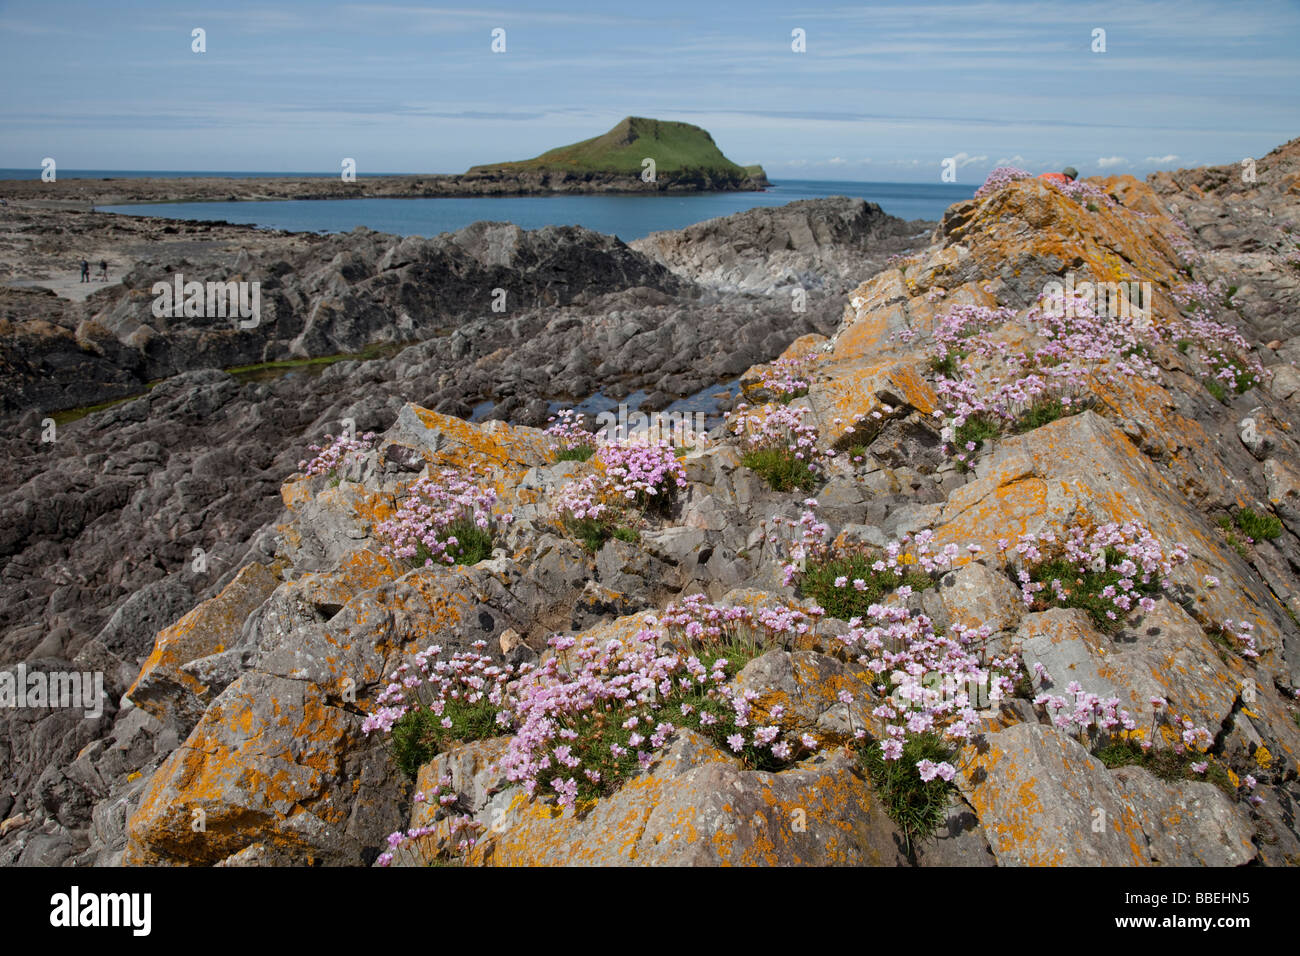 Thrift flowers Armeria maritima on rocky outcrops Worms Head The Gower South Wales UK Stock Photo